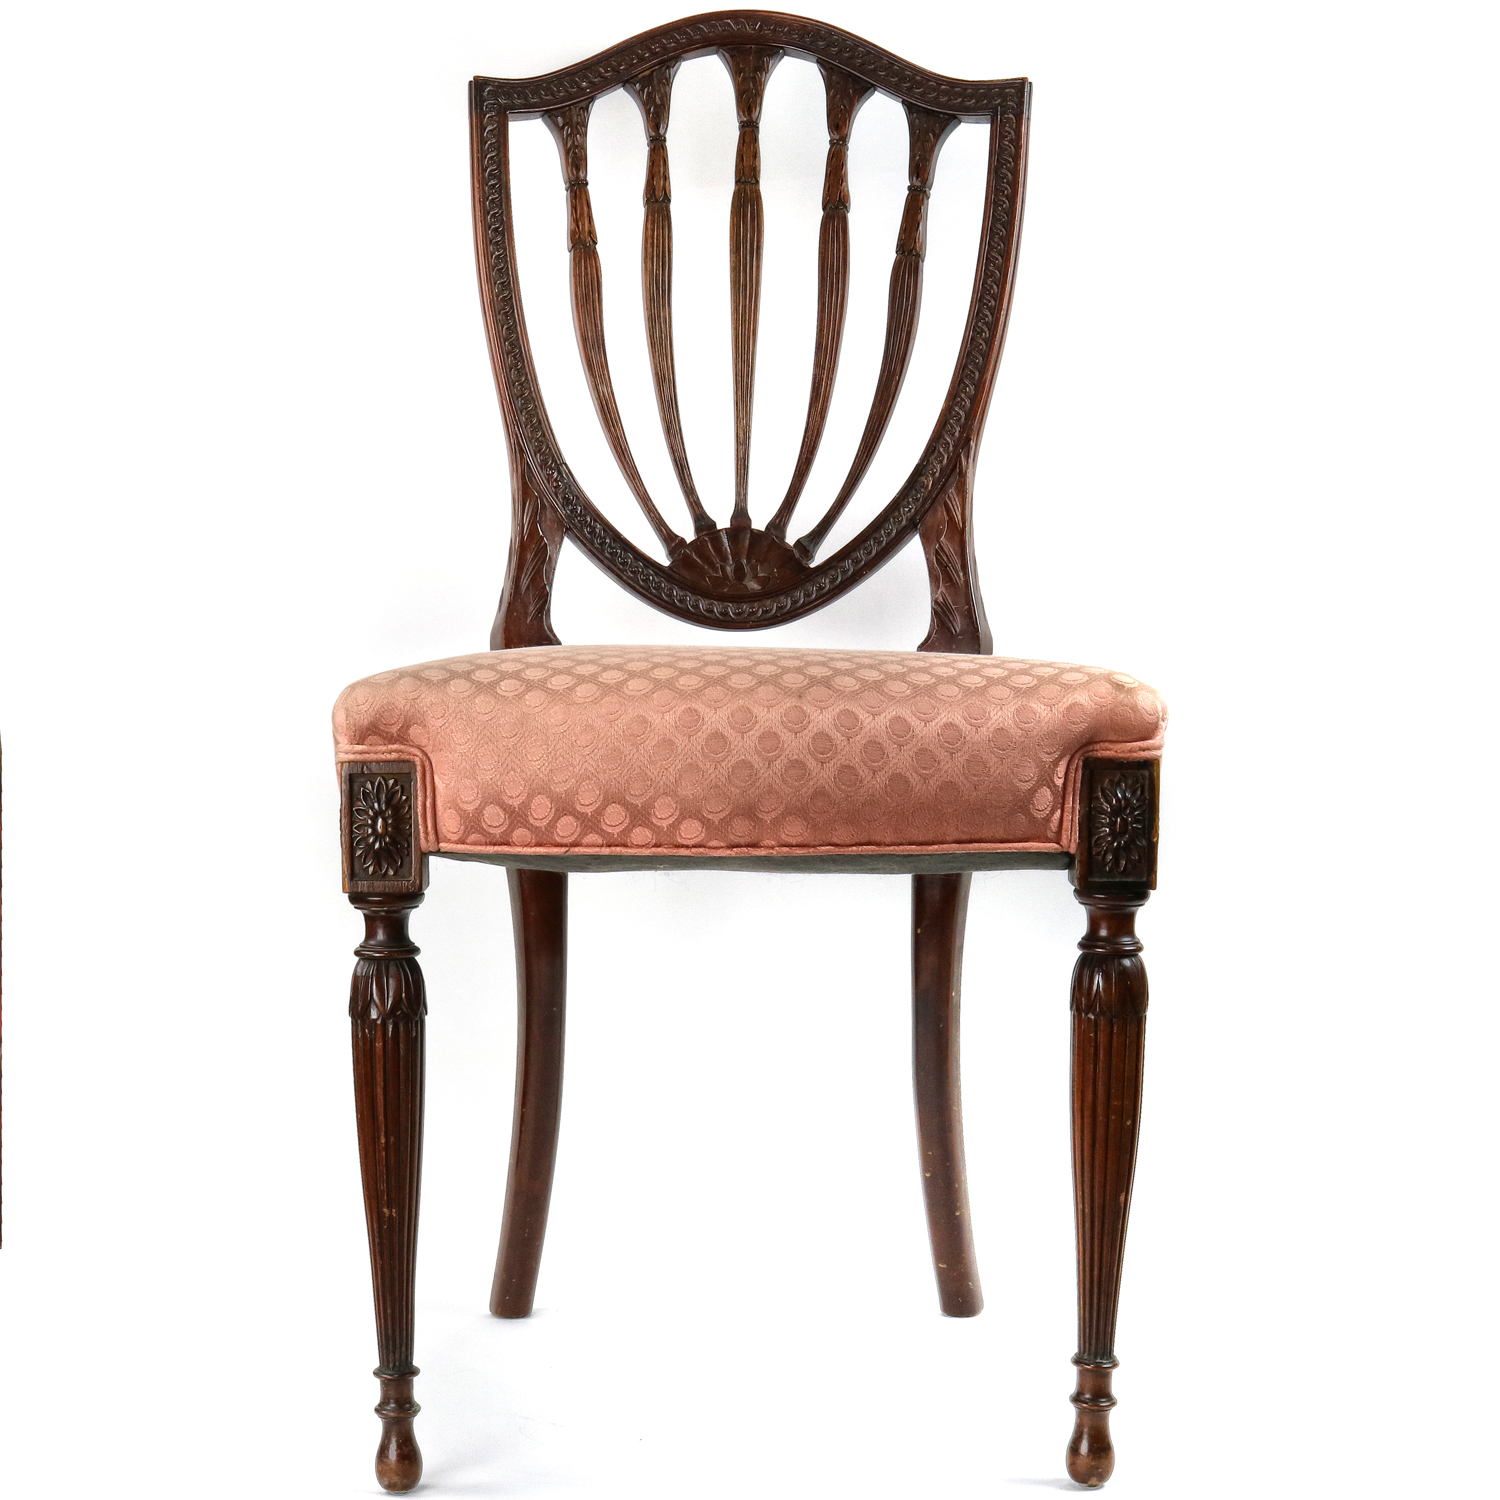 A FEDERAL STYLE MAHOGANY CHAIR